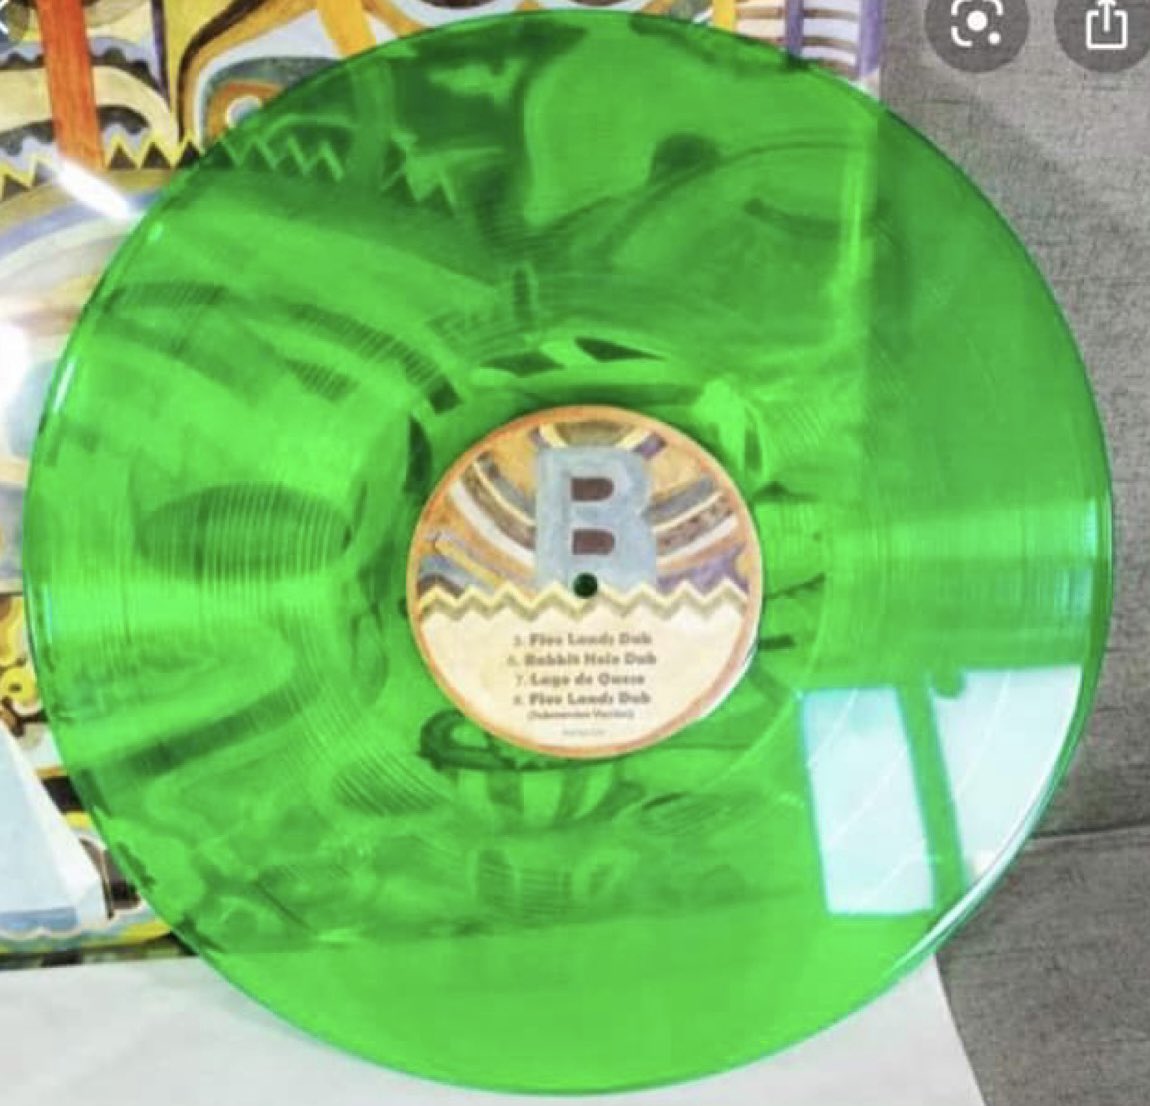 Mitch Lafon Twitter: "NEWS: Coming March 17th - a special St. Patrick's Day Peter Criss Green Vinyl re-release of Cat #1 - Ordering info in picture below. The